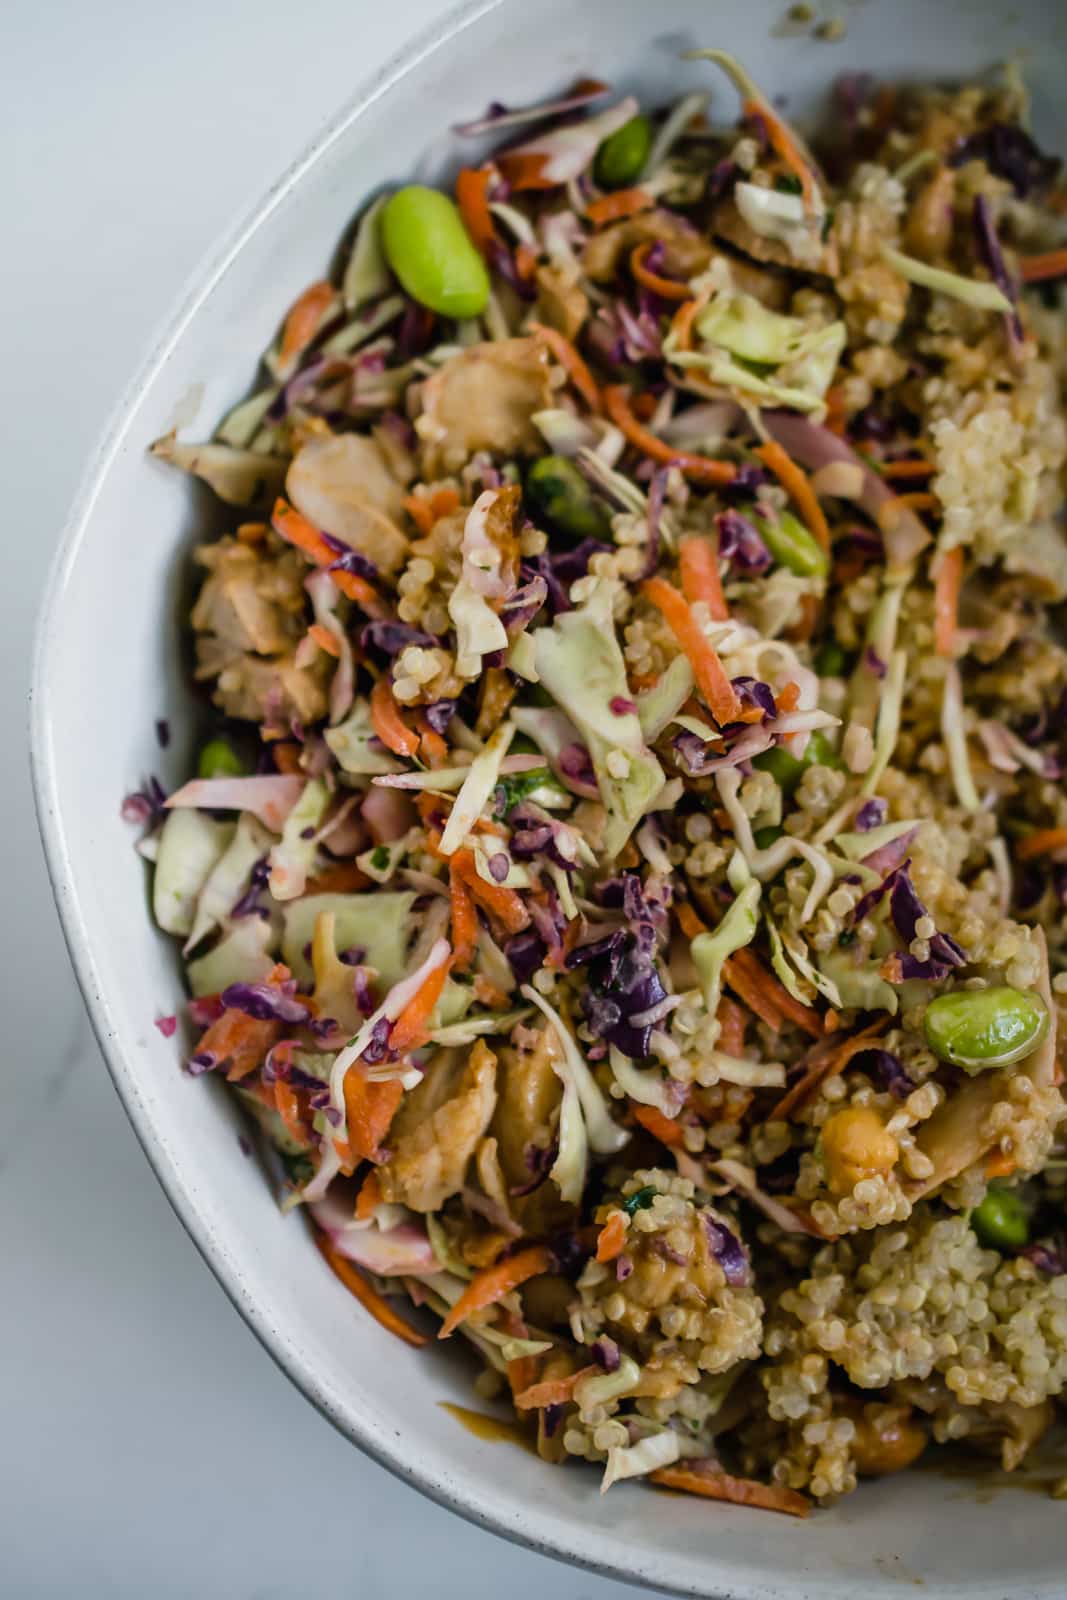 A gluten-free, dairy-free crunchy thai salad with quinoa and chicken in a bowl sprinkled with cashews and edamamev